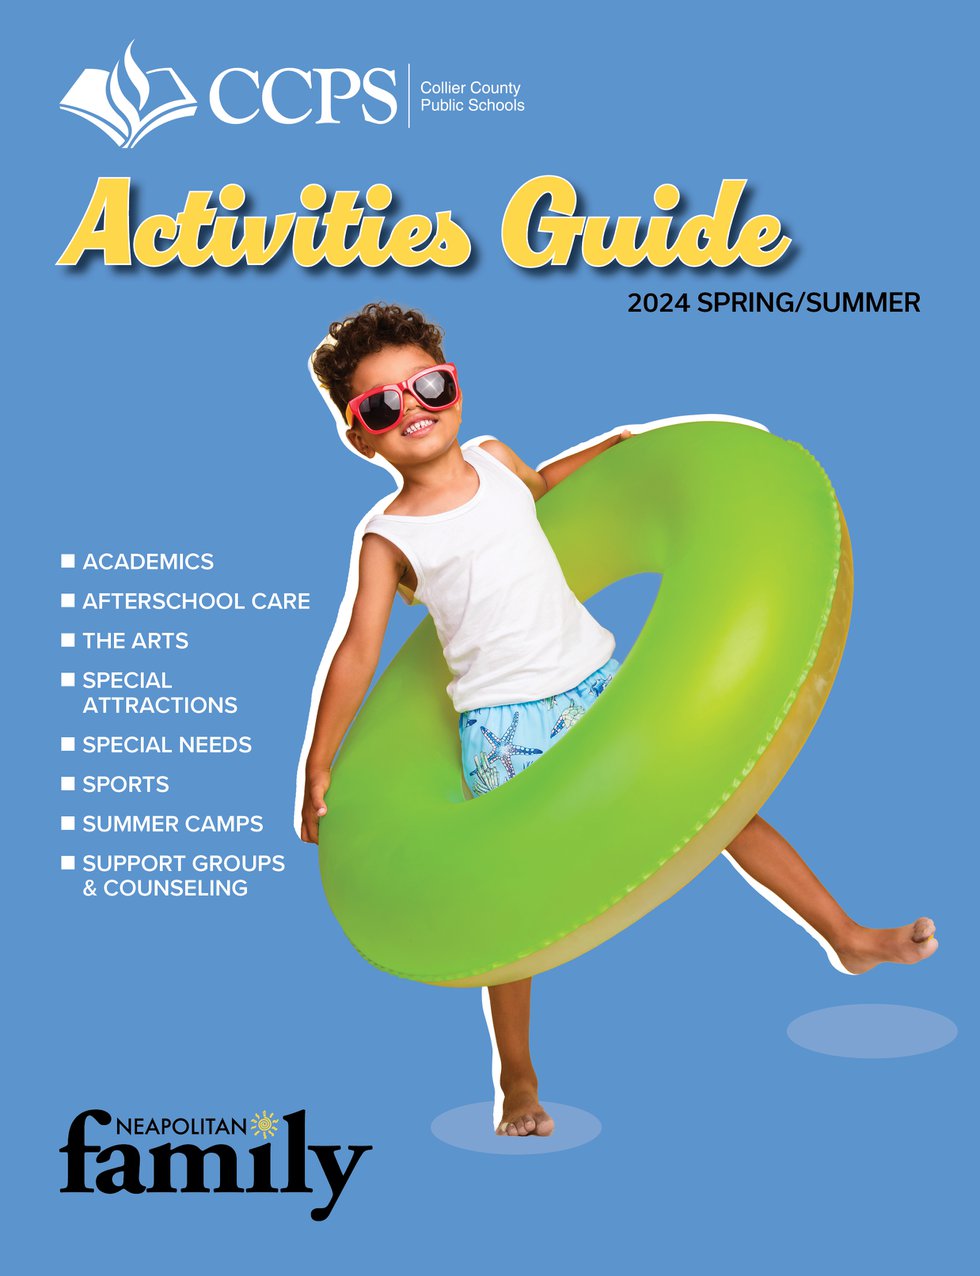 2024 Spring/Summer activities guide